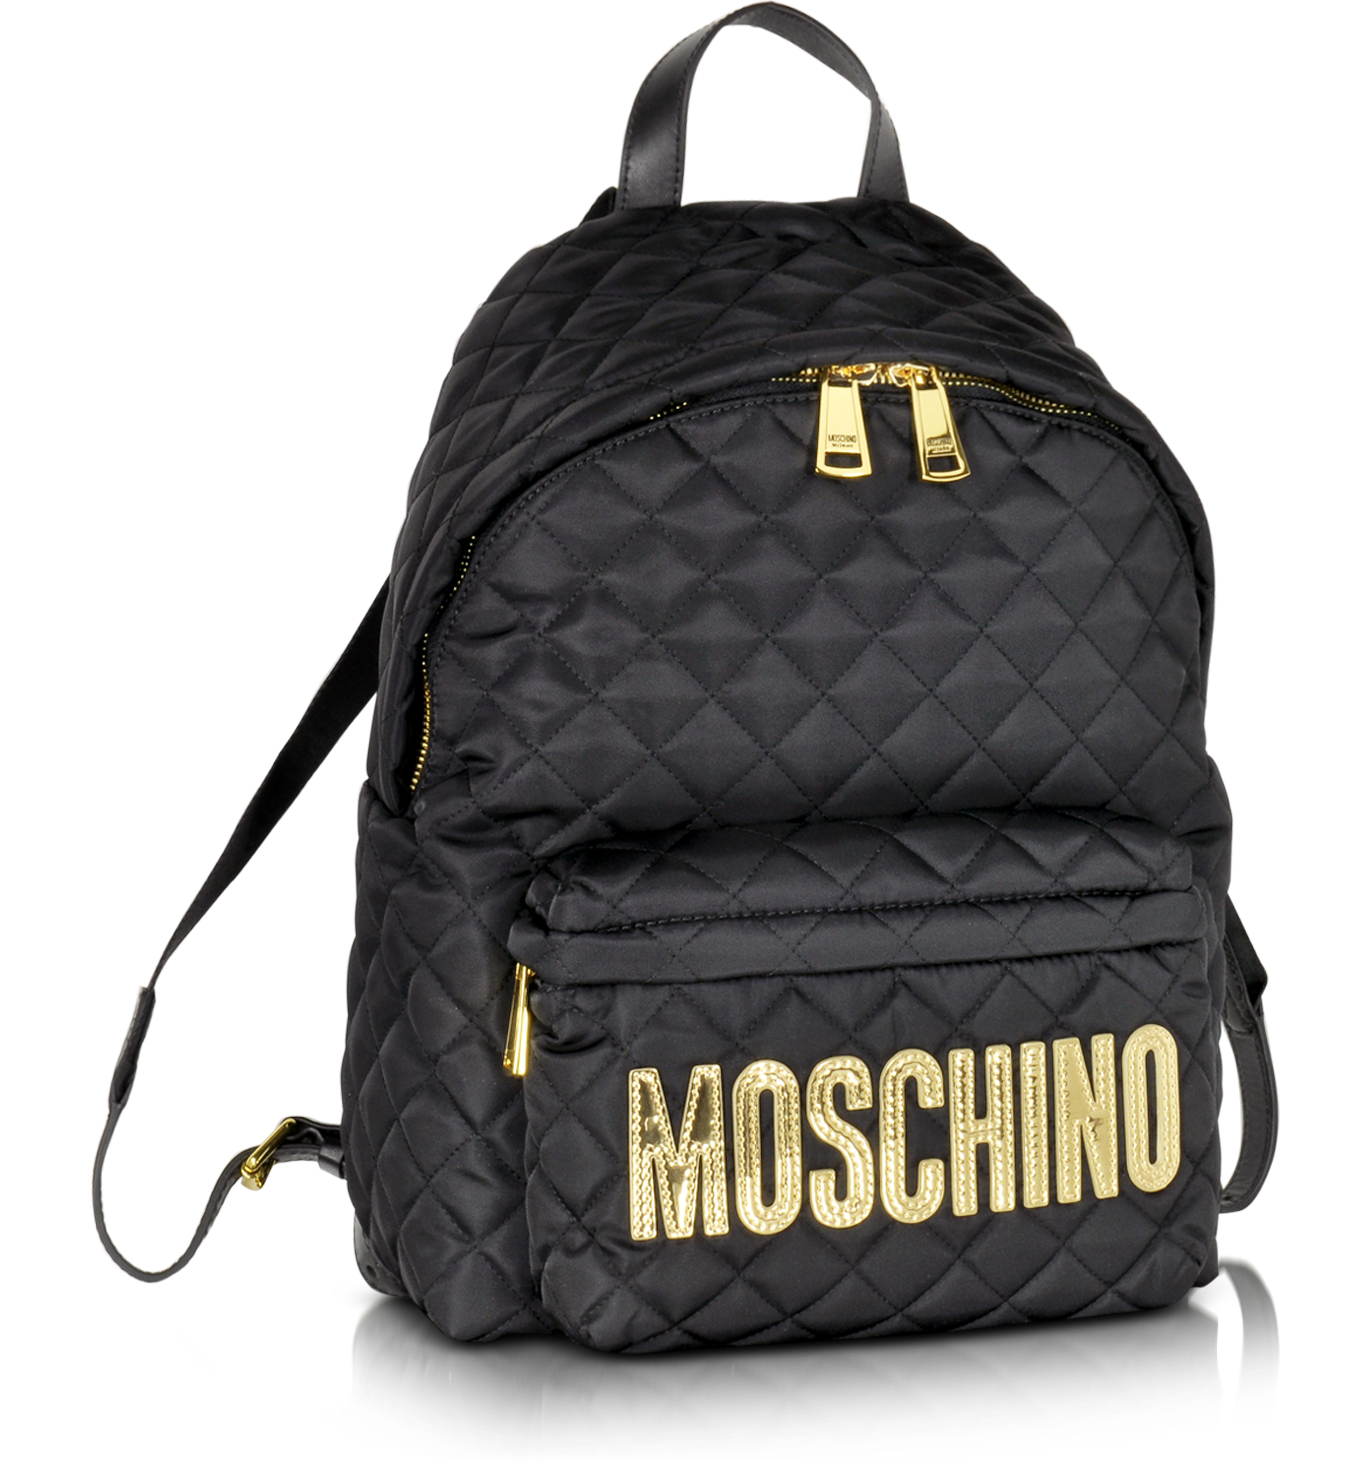 Moschino Black Quilted Nylon Backpack w/Laminated Logo at FORZIERI